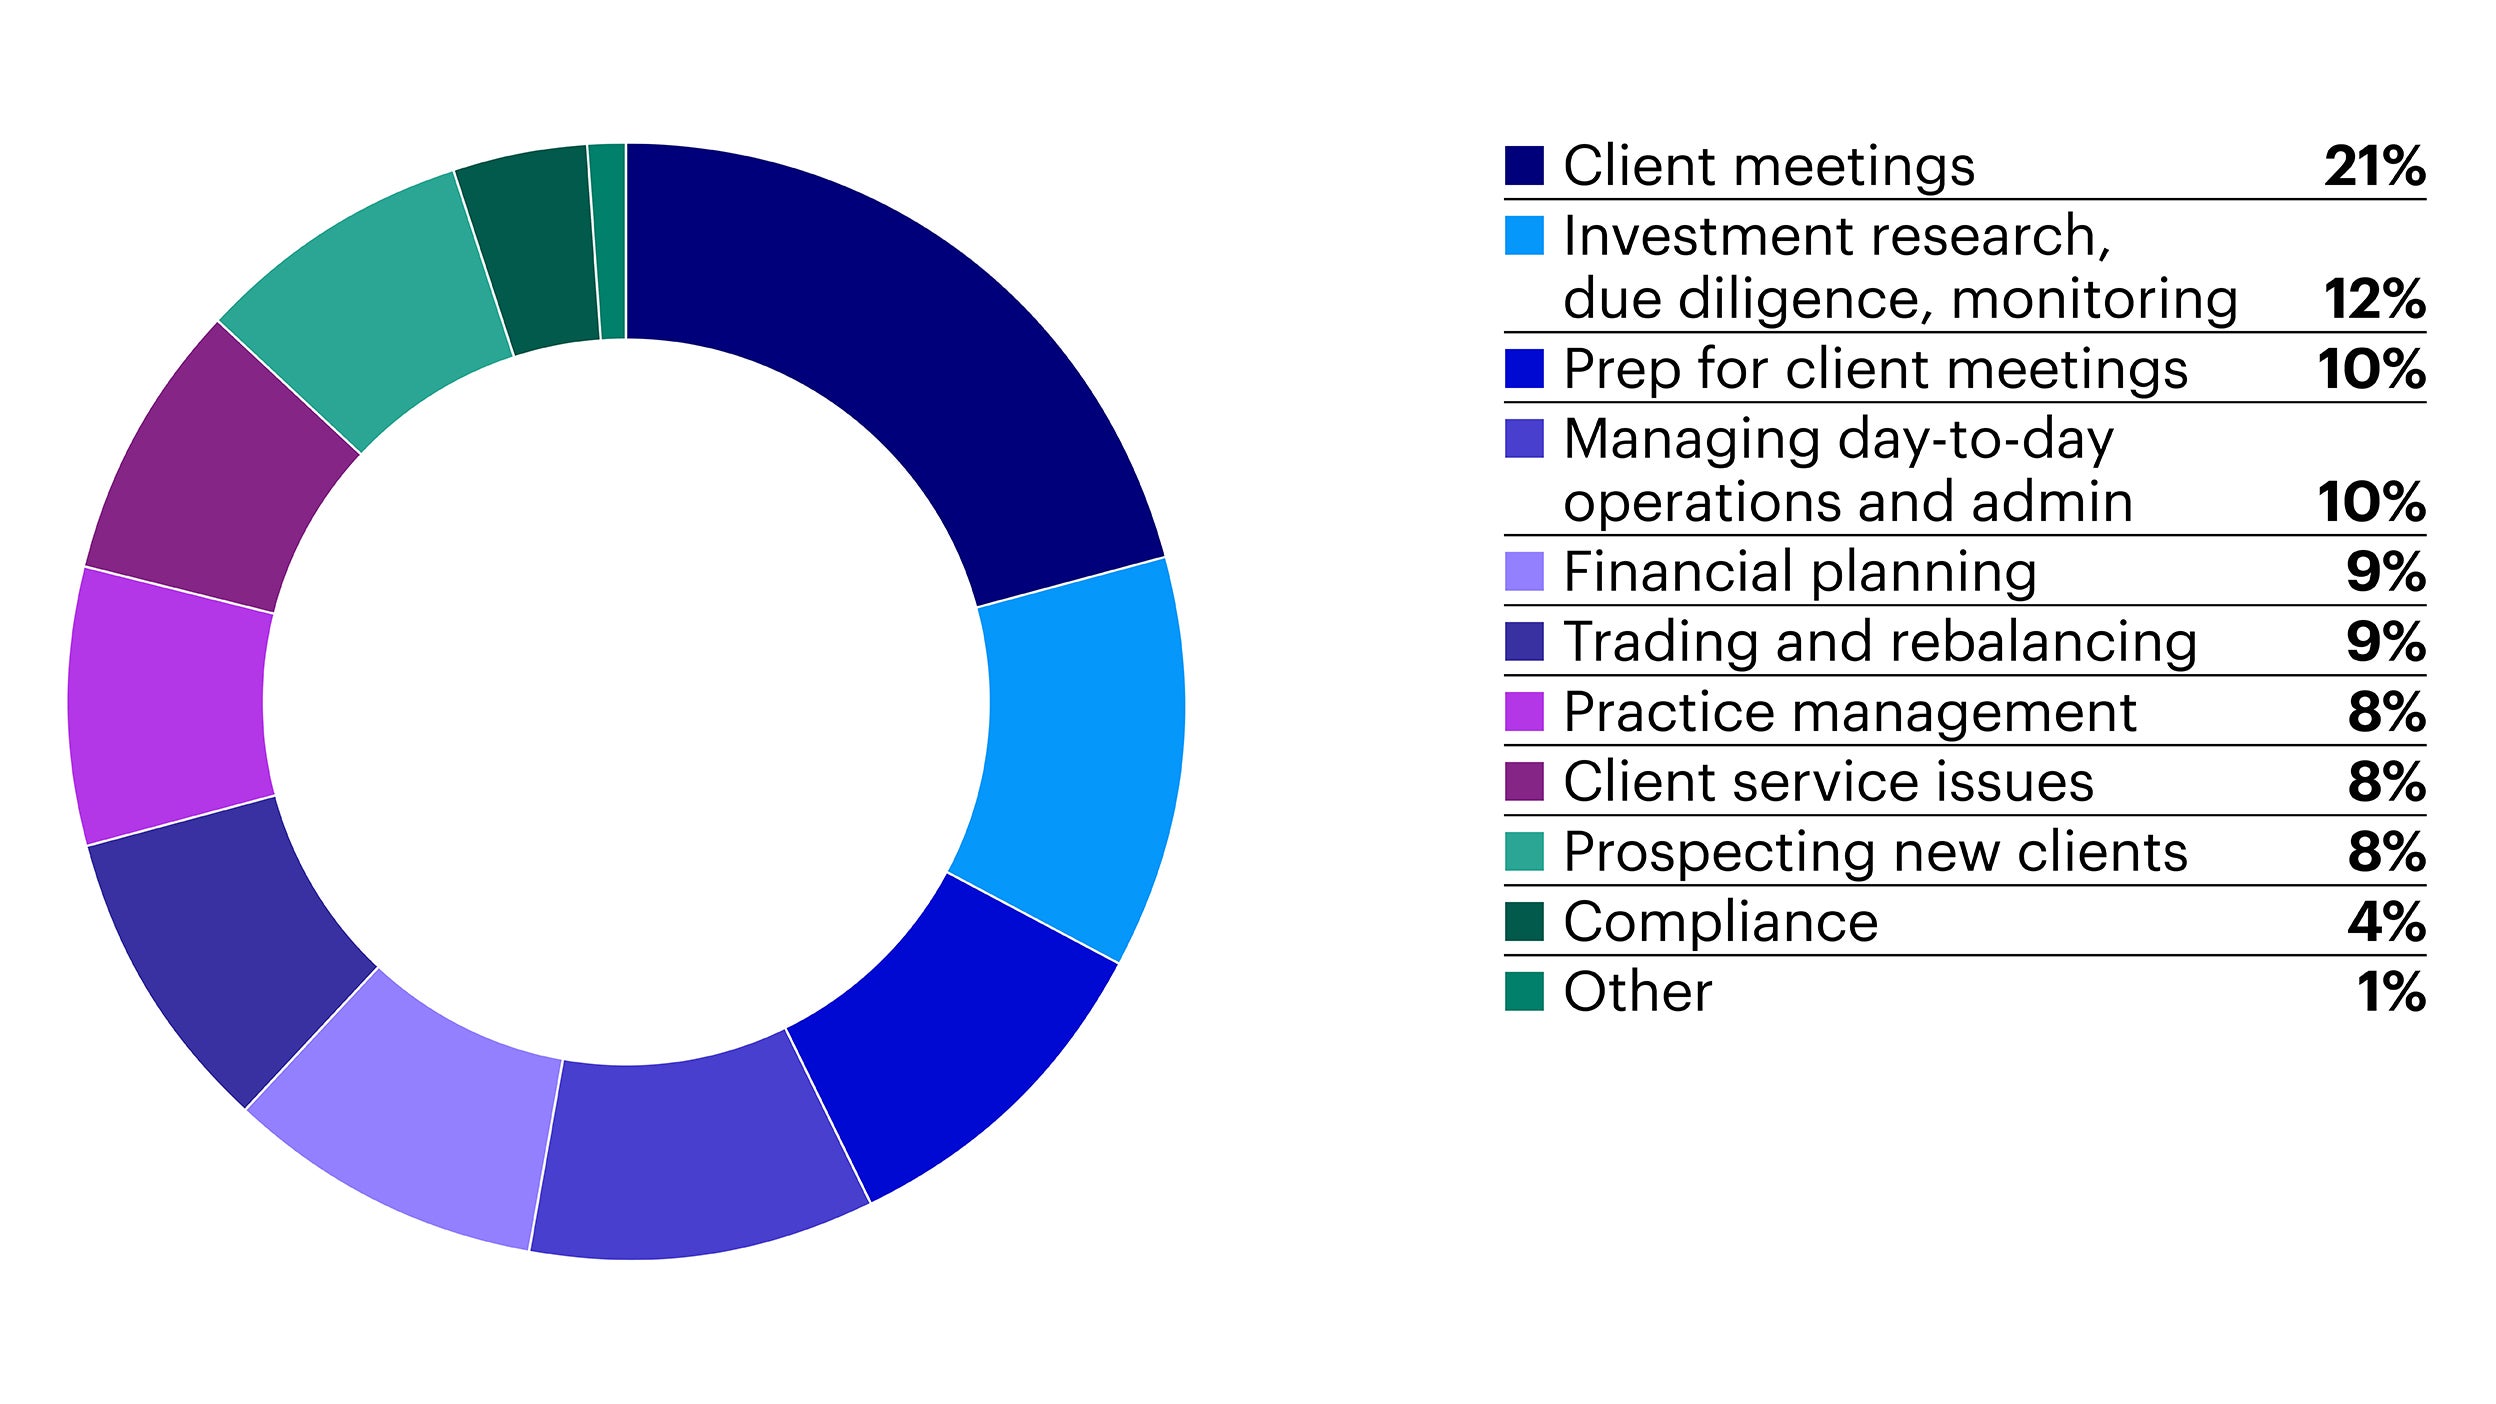 21% of time is spent in client meetings, 12% investment research, 10% prep for client meetings and managing operations, 9% for financial planning and trading, 8% for service and prospecting, 4% for Compliance, and 1% other.